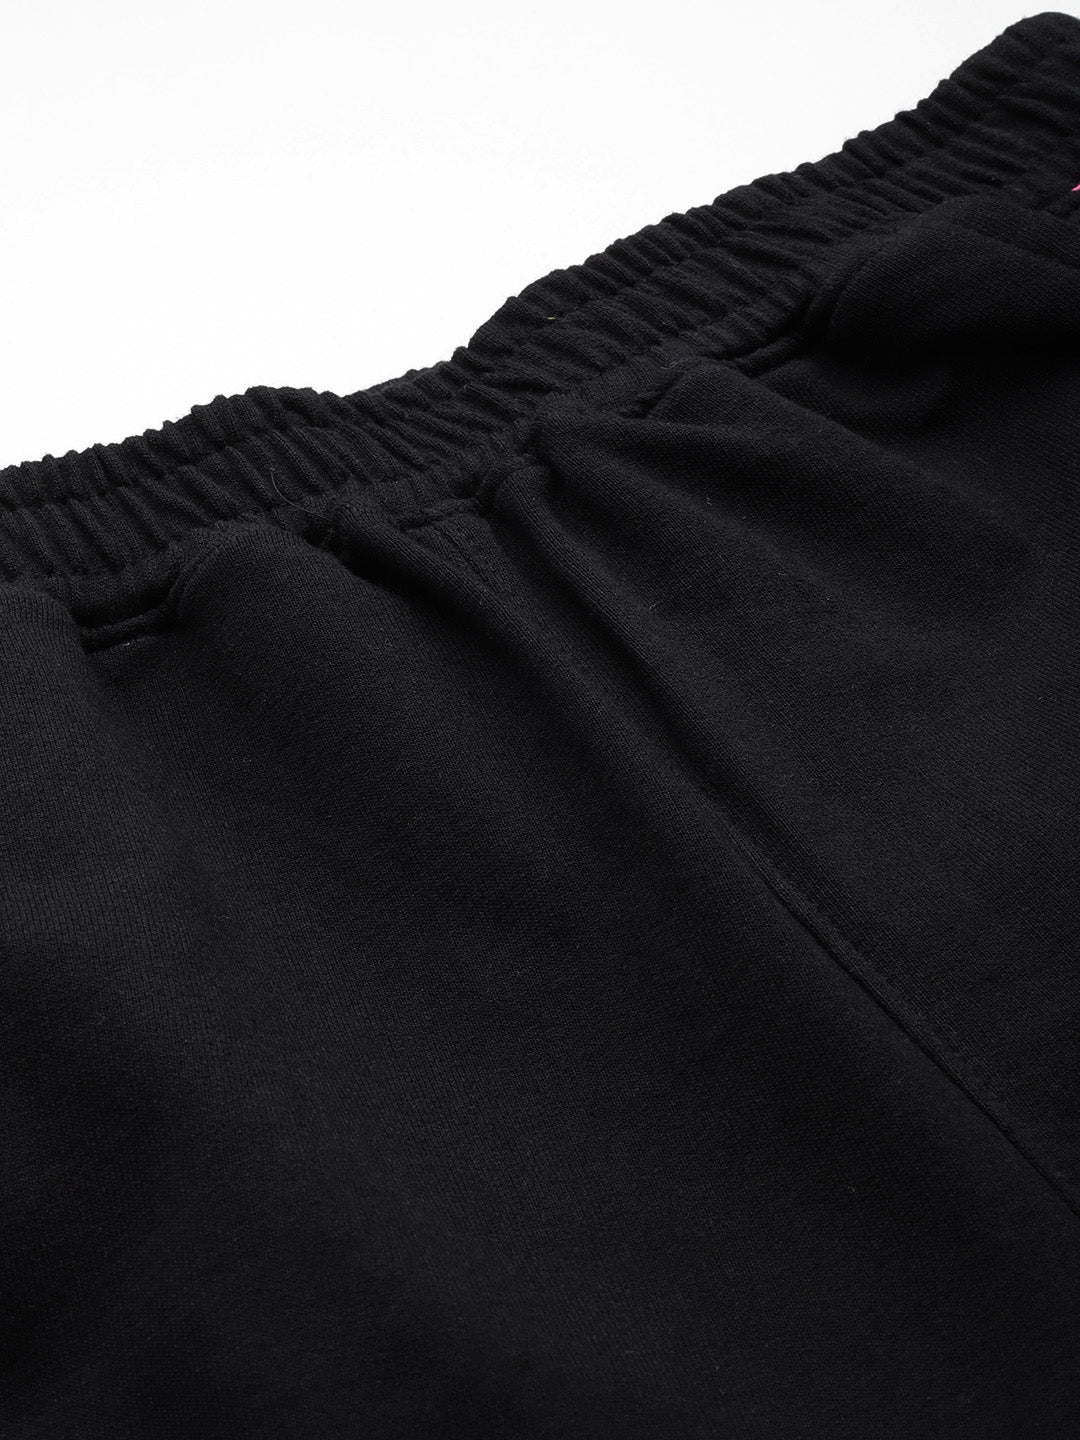 Black trackpants With contrasting colour side stripes